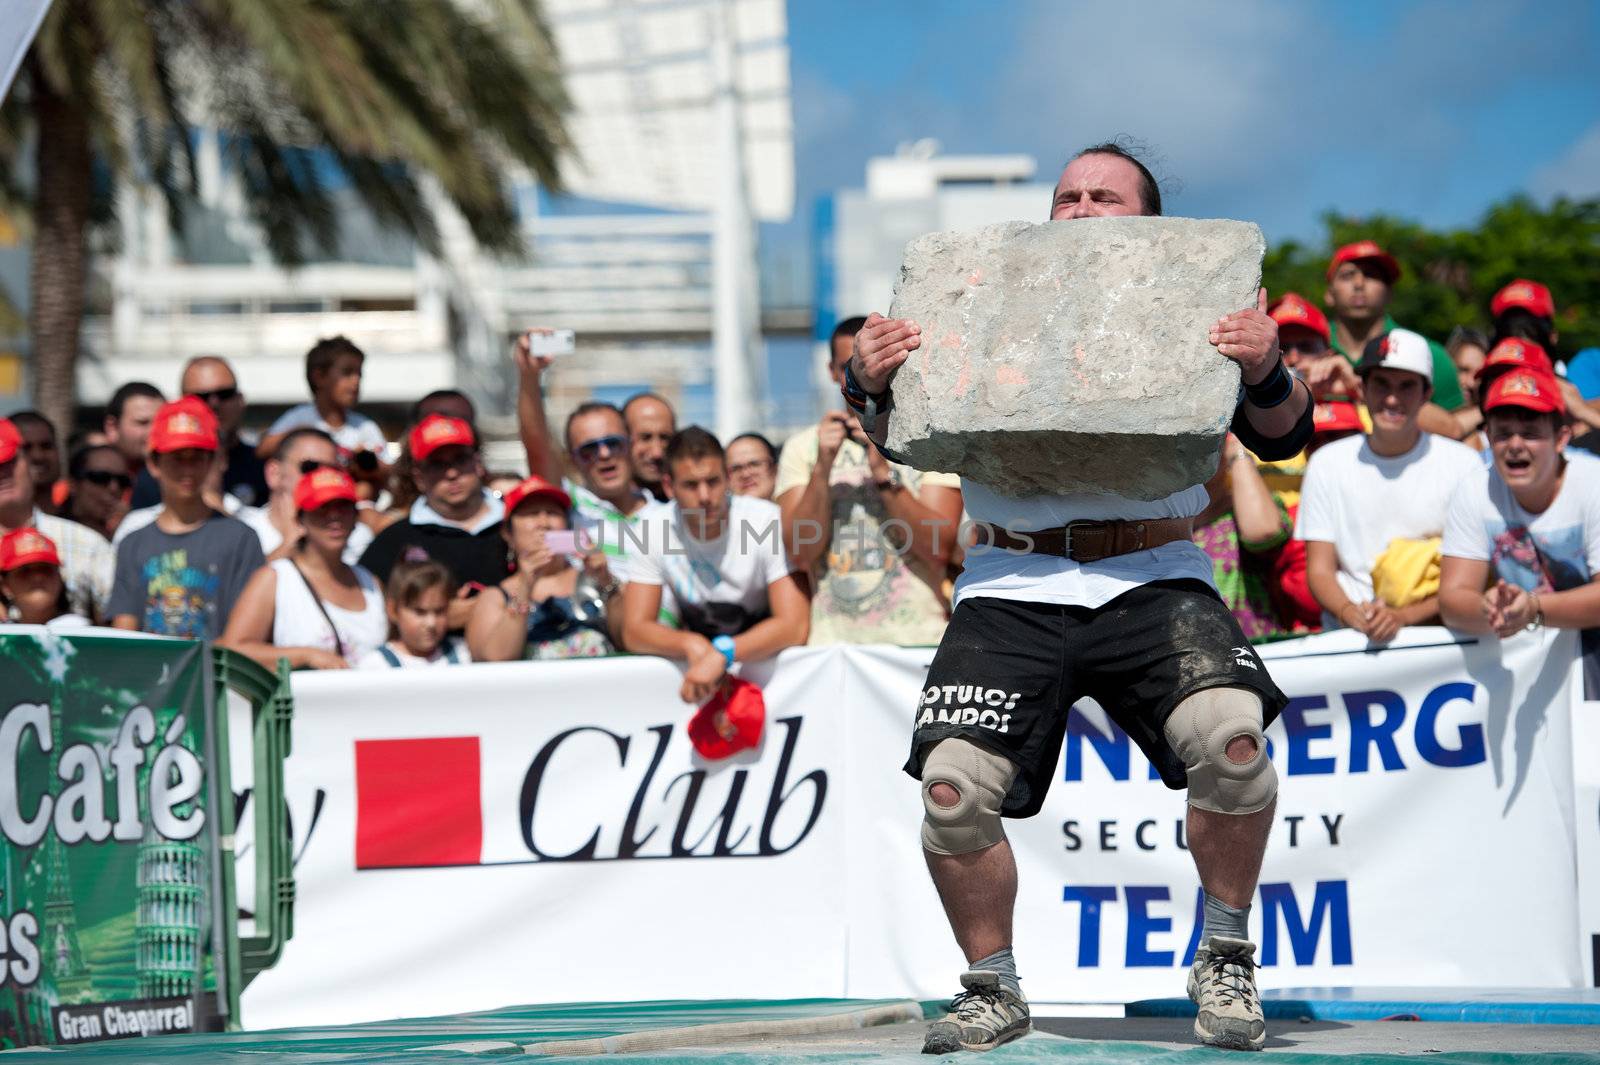 CANARY ISLANDS – SEPTEMBER 03: Julio Jimenez Zancajo from Spain lifting a heavy stone during Strongman Champions League in Las Palmas September 03, 2011 in Canary Islands, Spain